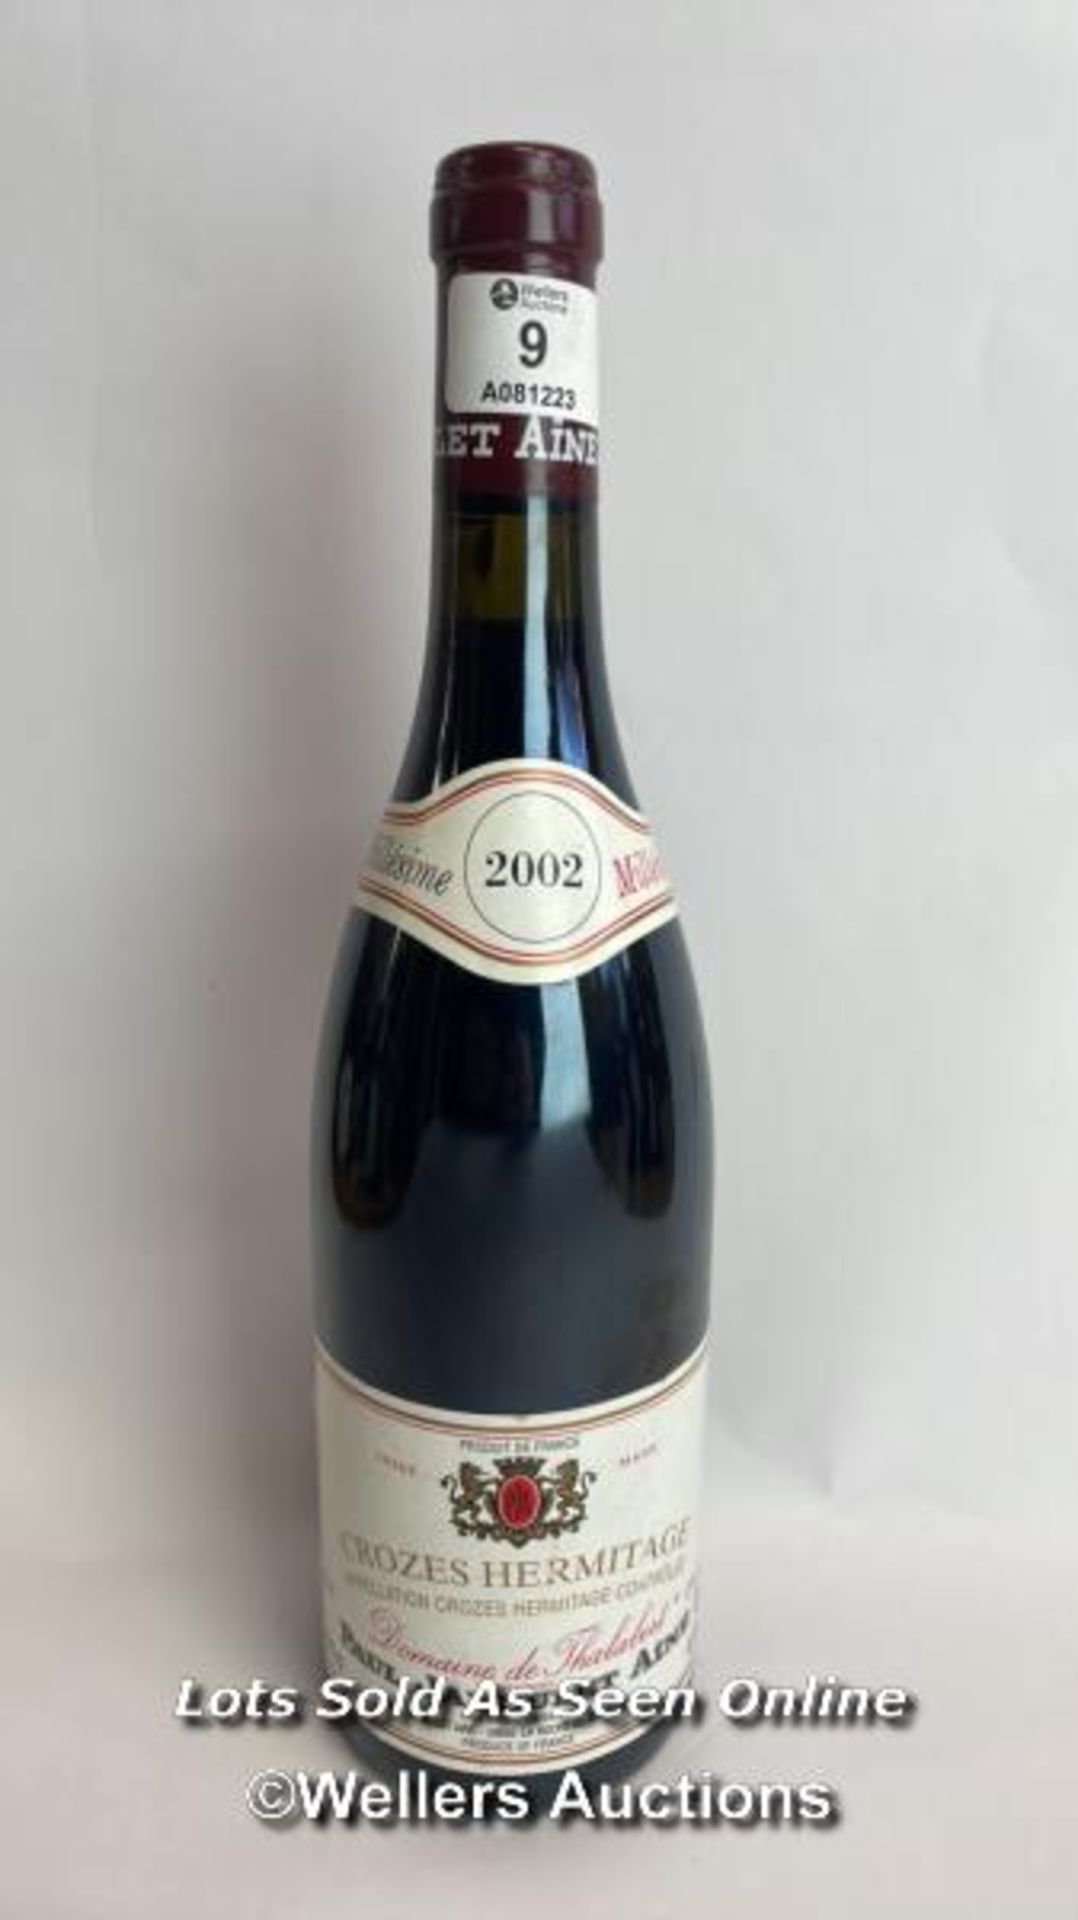 2002 Millesime Crozes Hermitage Paul Jaboulet Aine, 75cl, 12.5% VOL / Please see images for fill